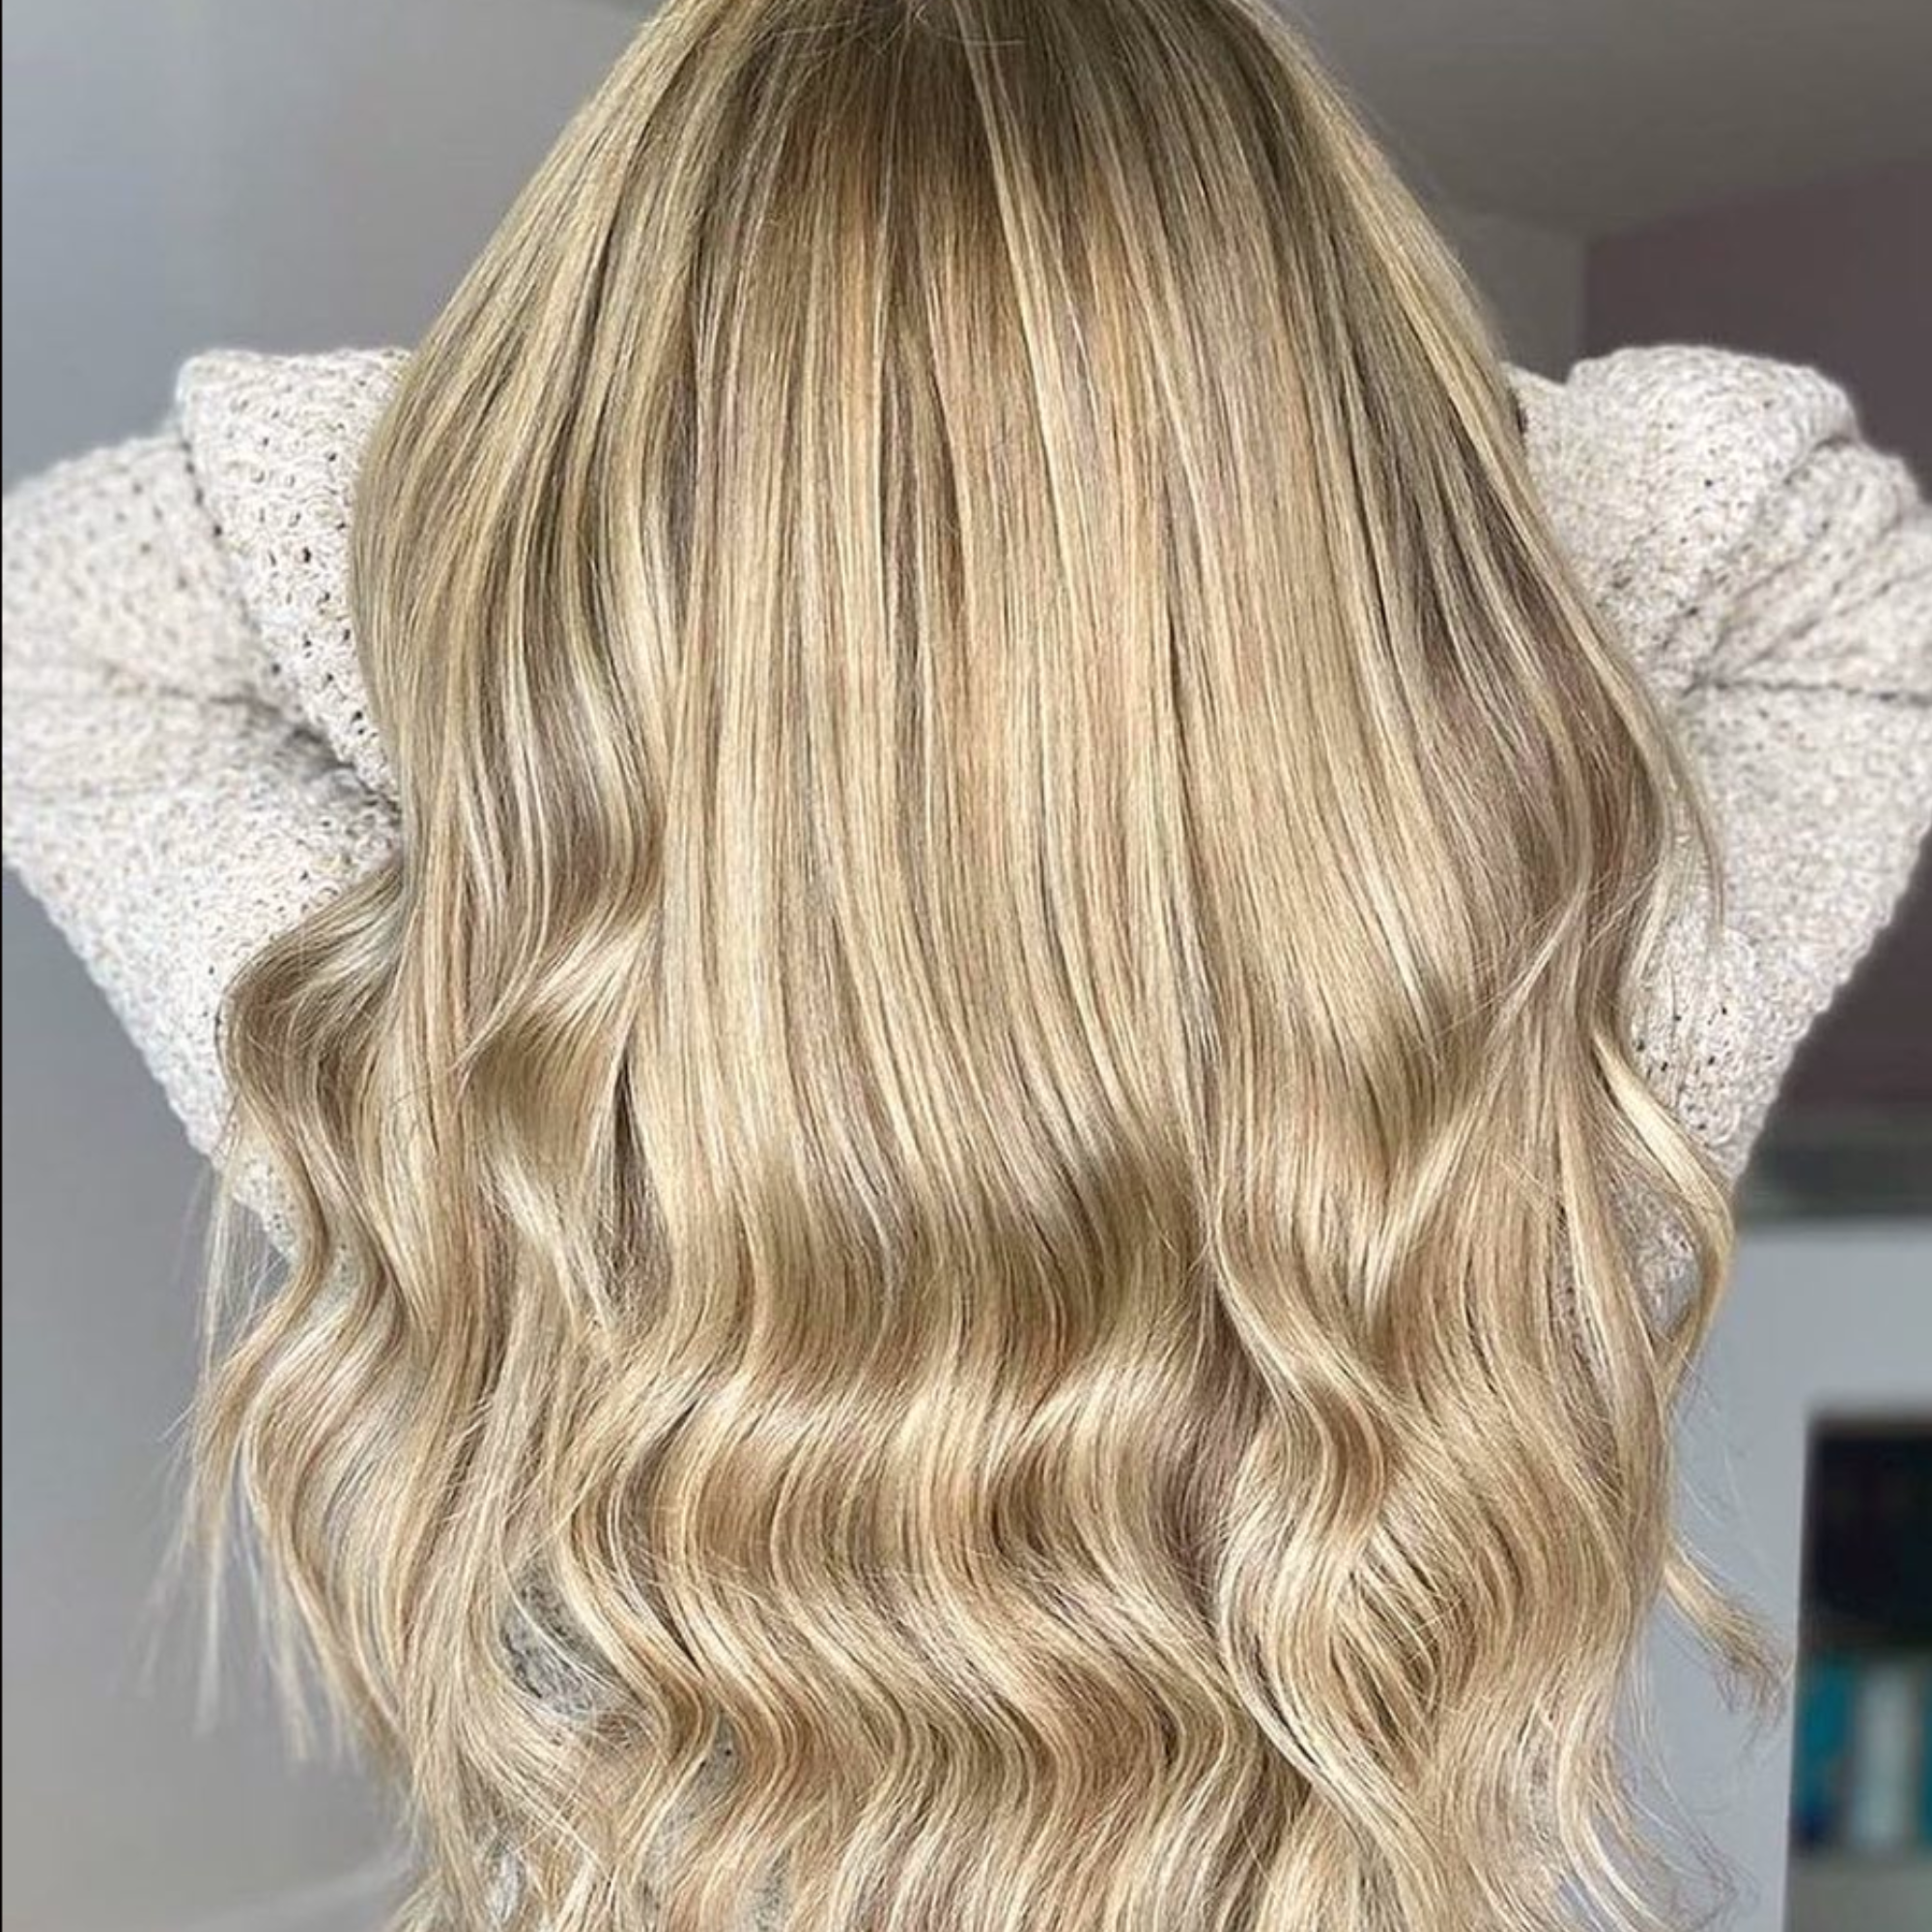 "hair rehab london 22" weft hair extensions shade swatch titled coachella blonde"